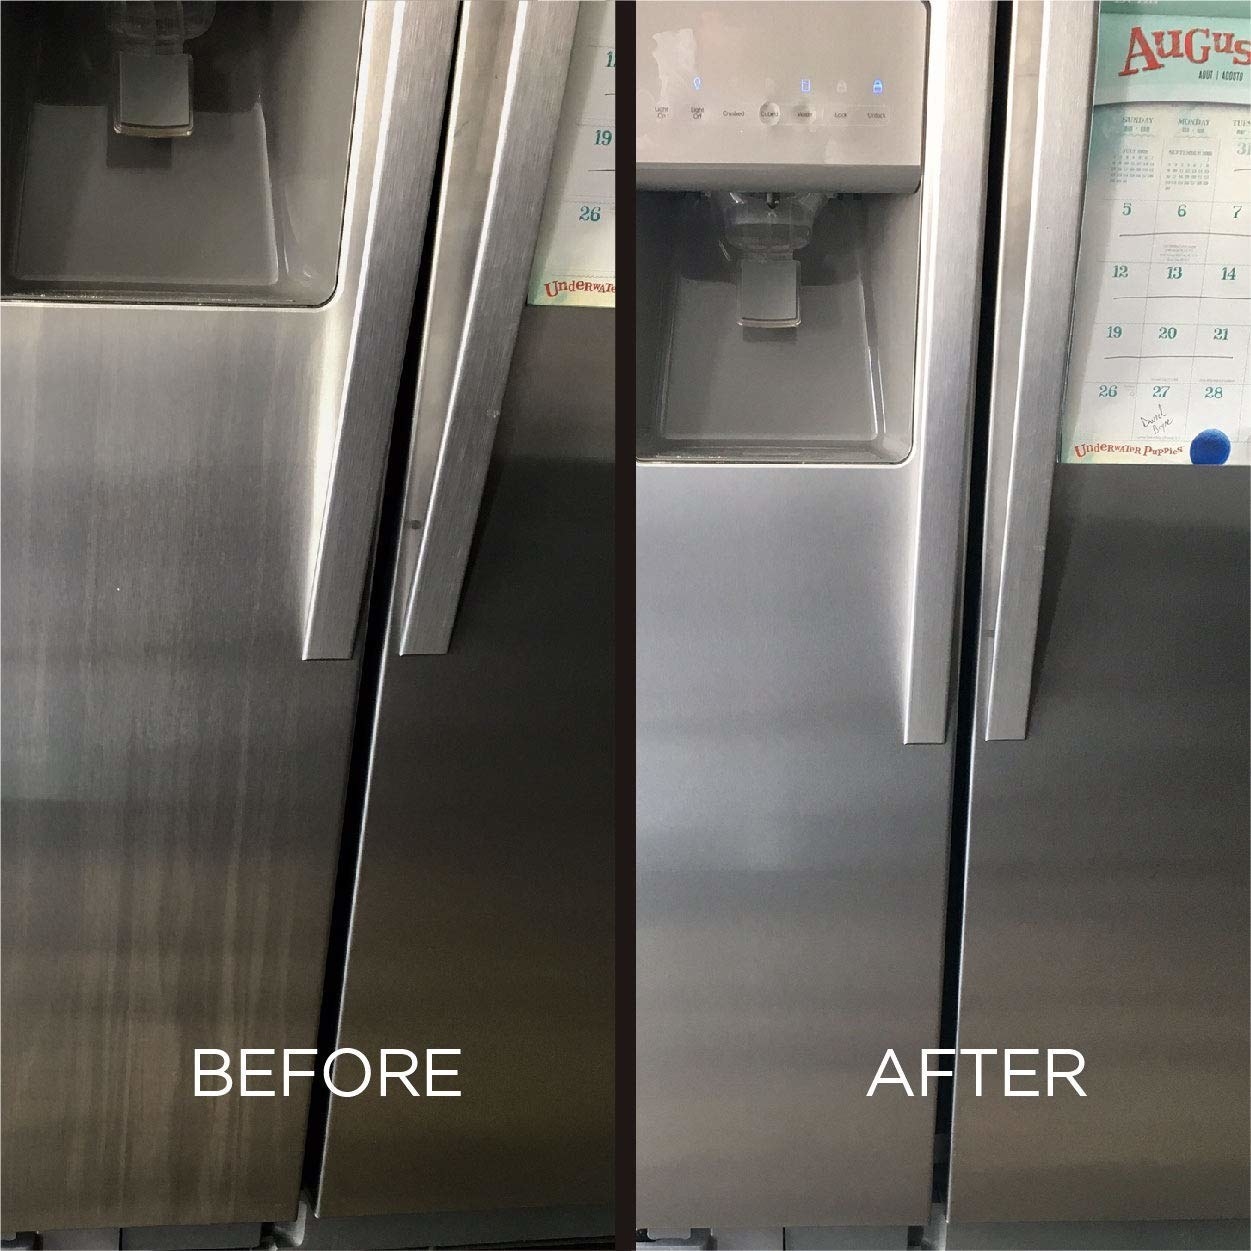 A before/after of a stainless steal fridge, showing the streaks the wipes removed